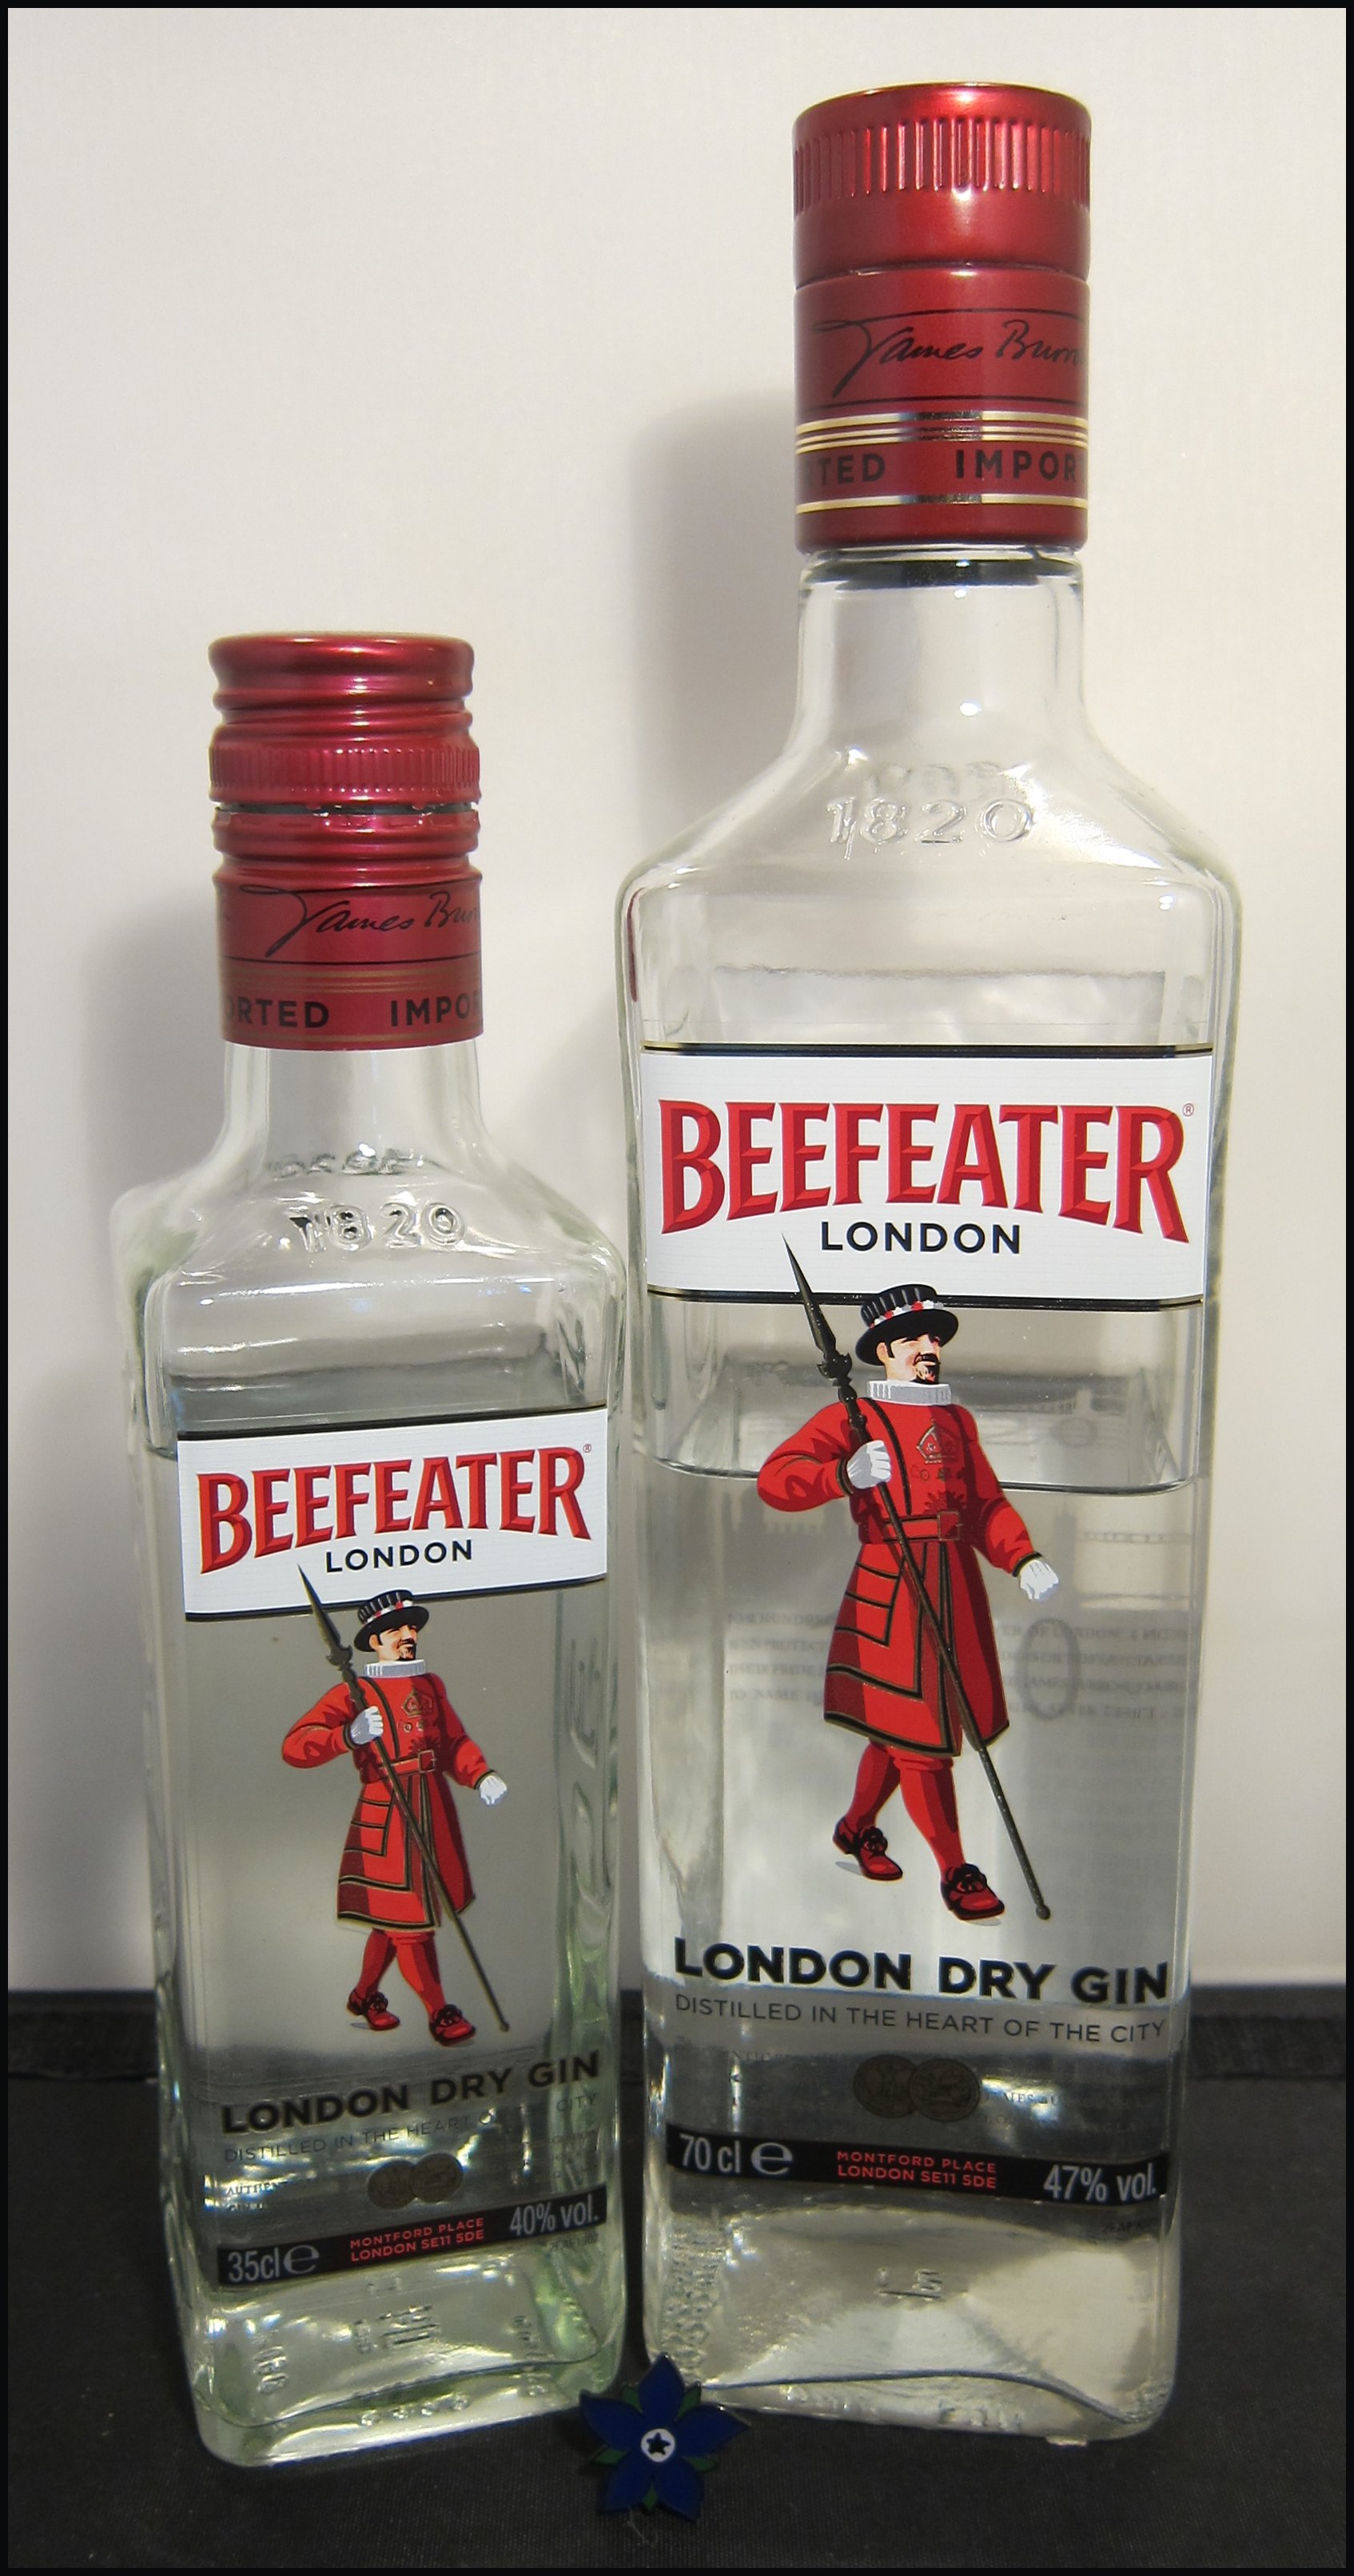 Gin Beefeater with… Cocktails London | Cup With Summer Garden Fruit Gin! Bonus Beefeater –